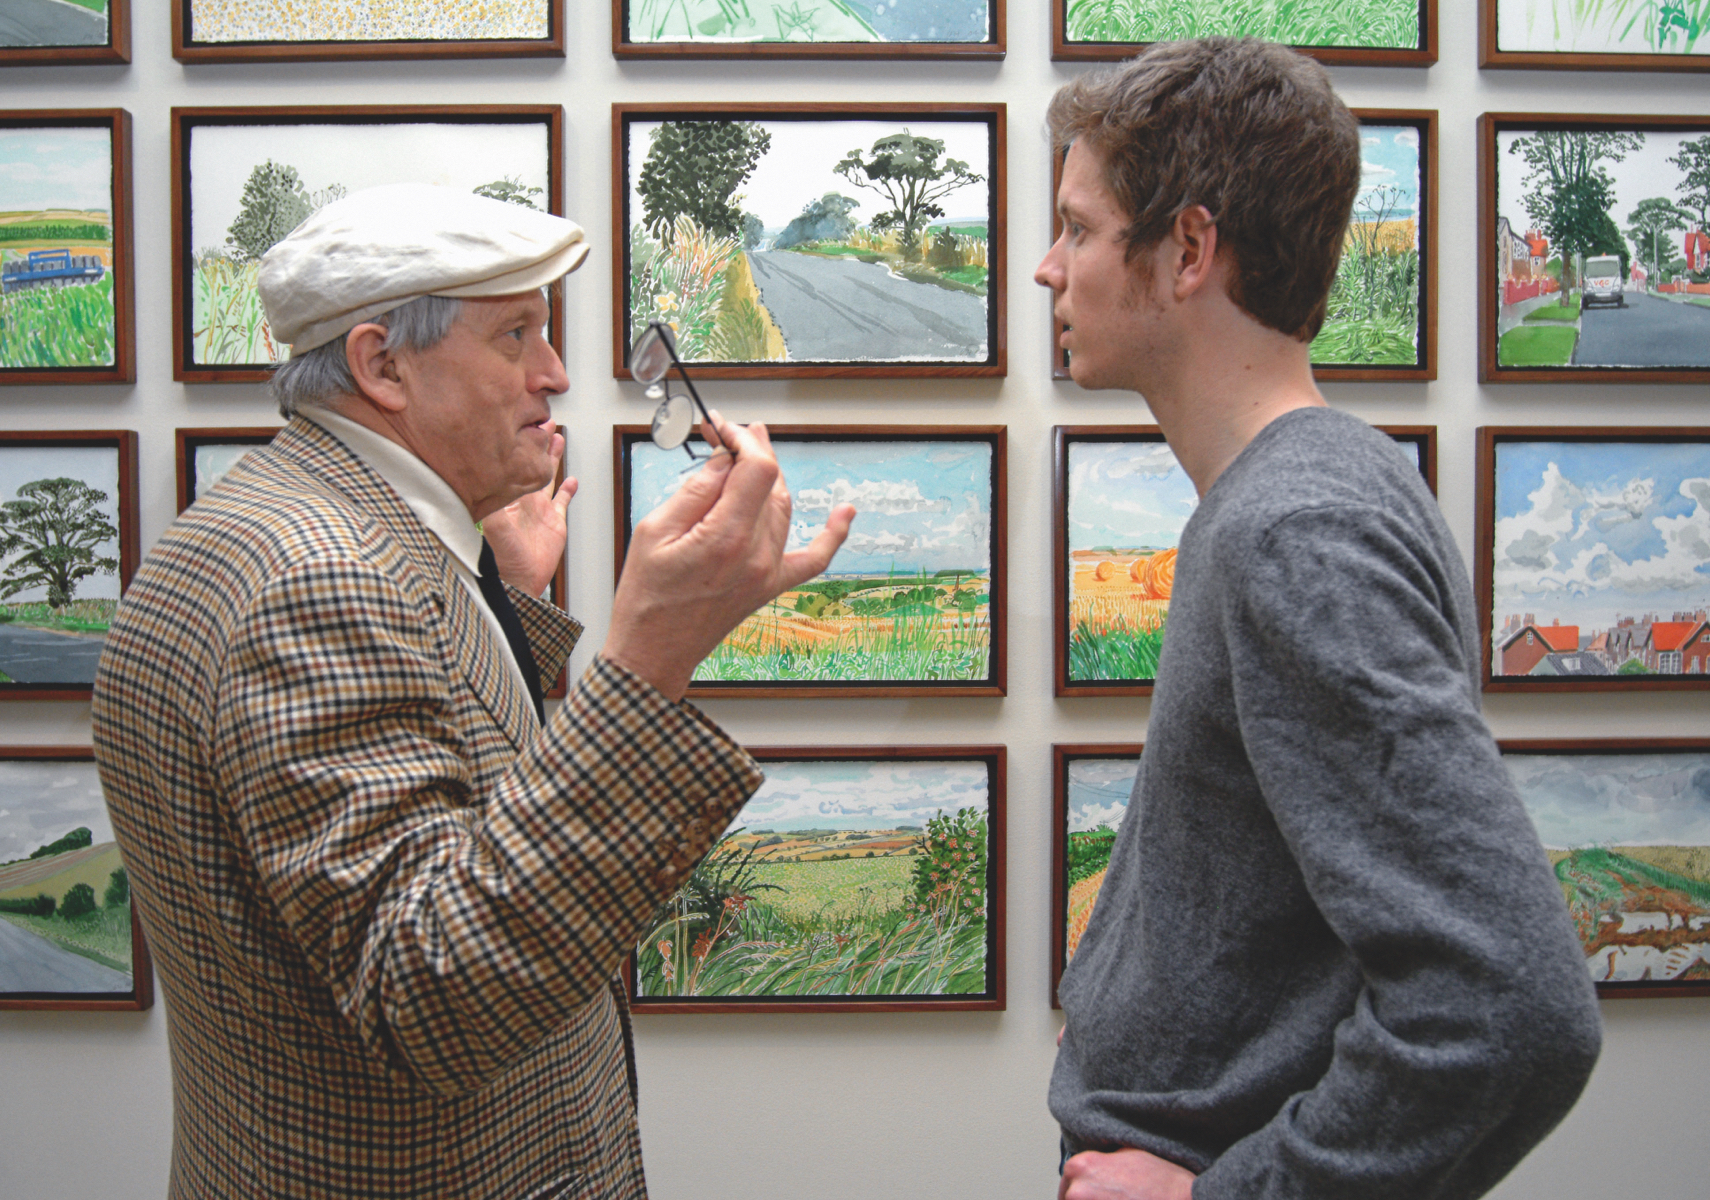 Men chatting in an art gallery in front of paintings